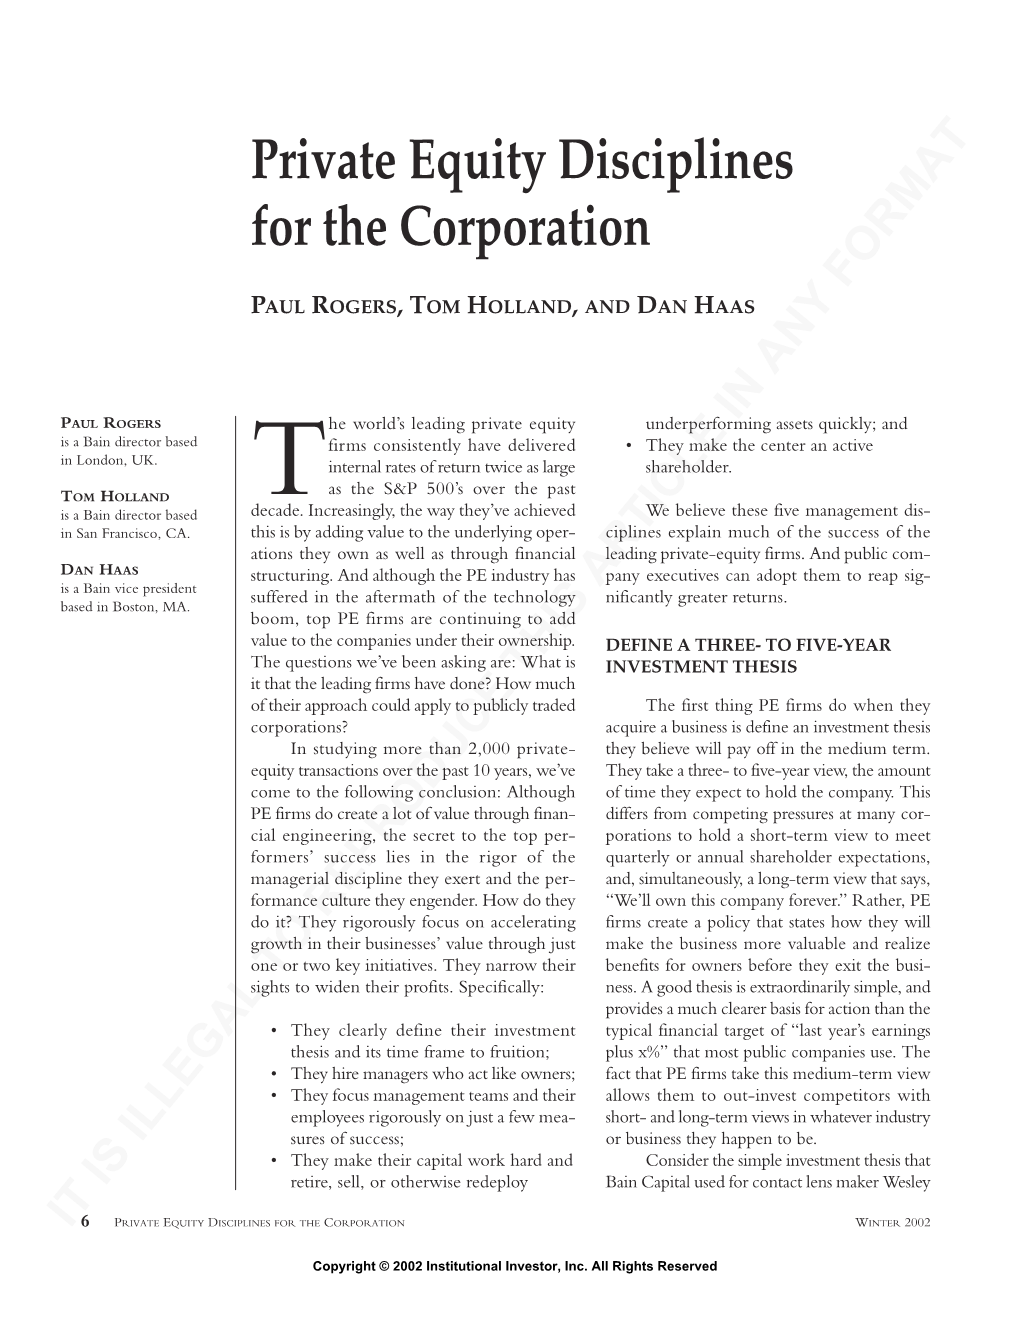 Private Equity Disciplines for the Corporation